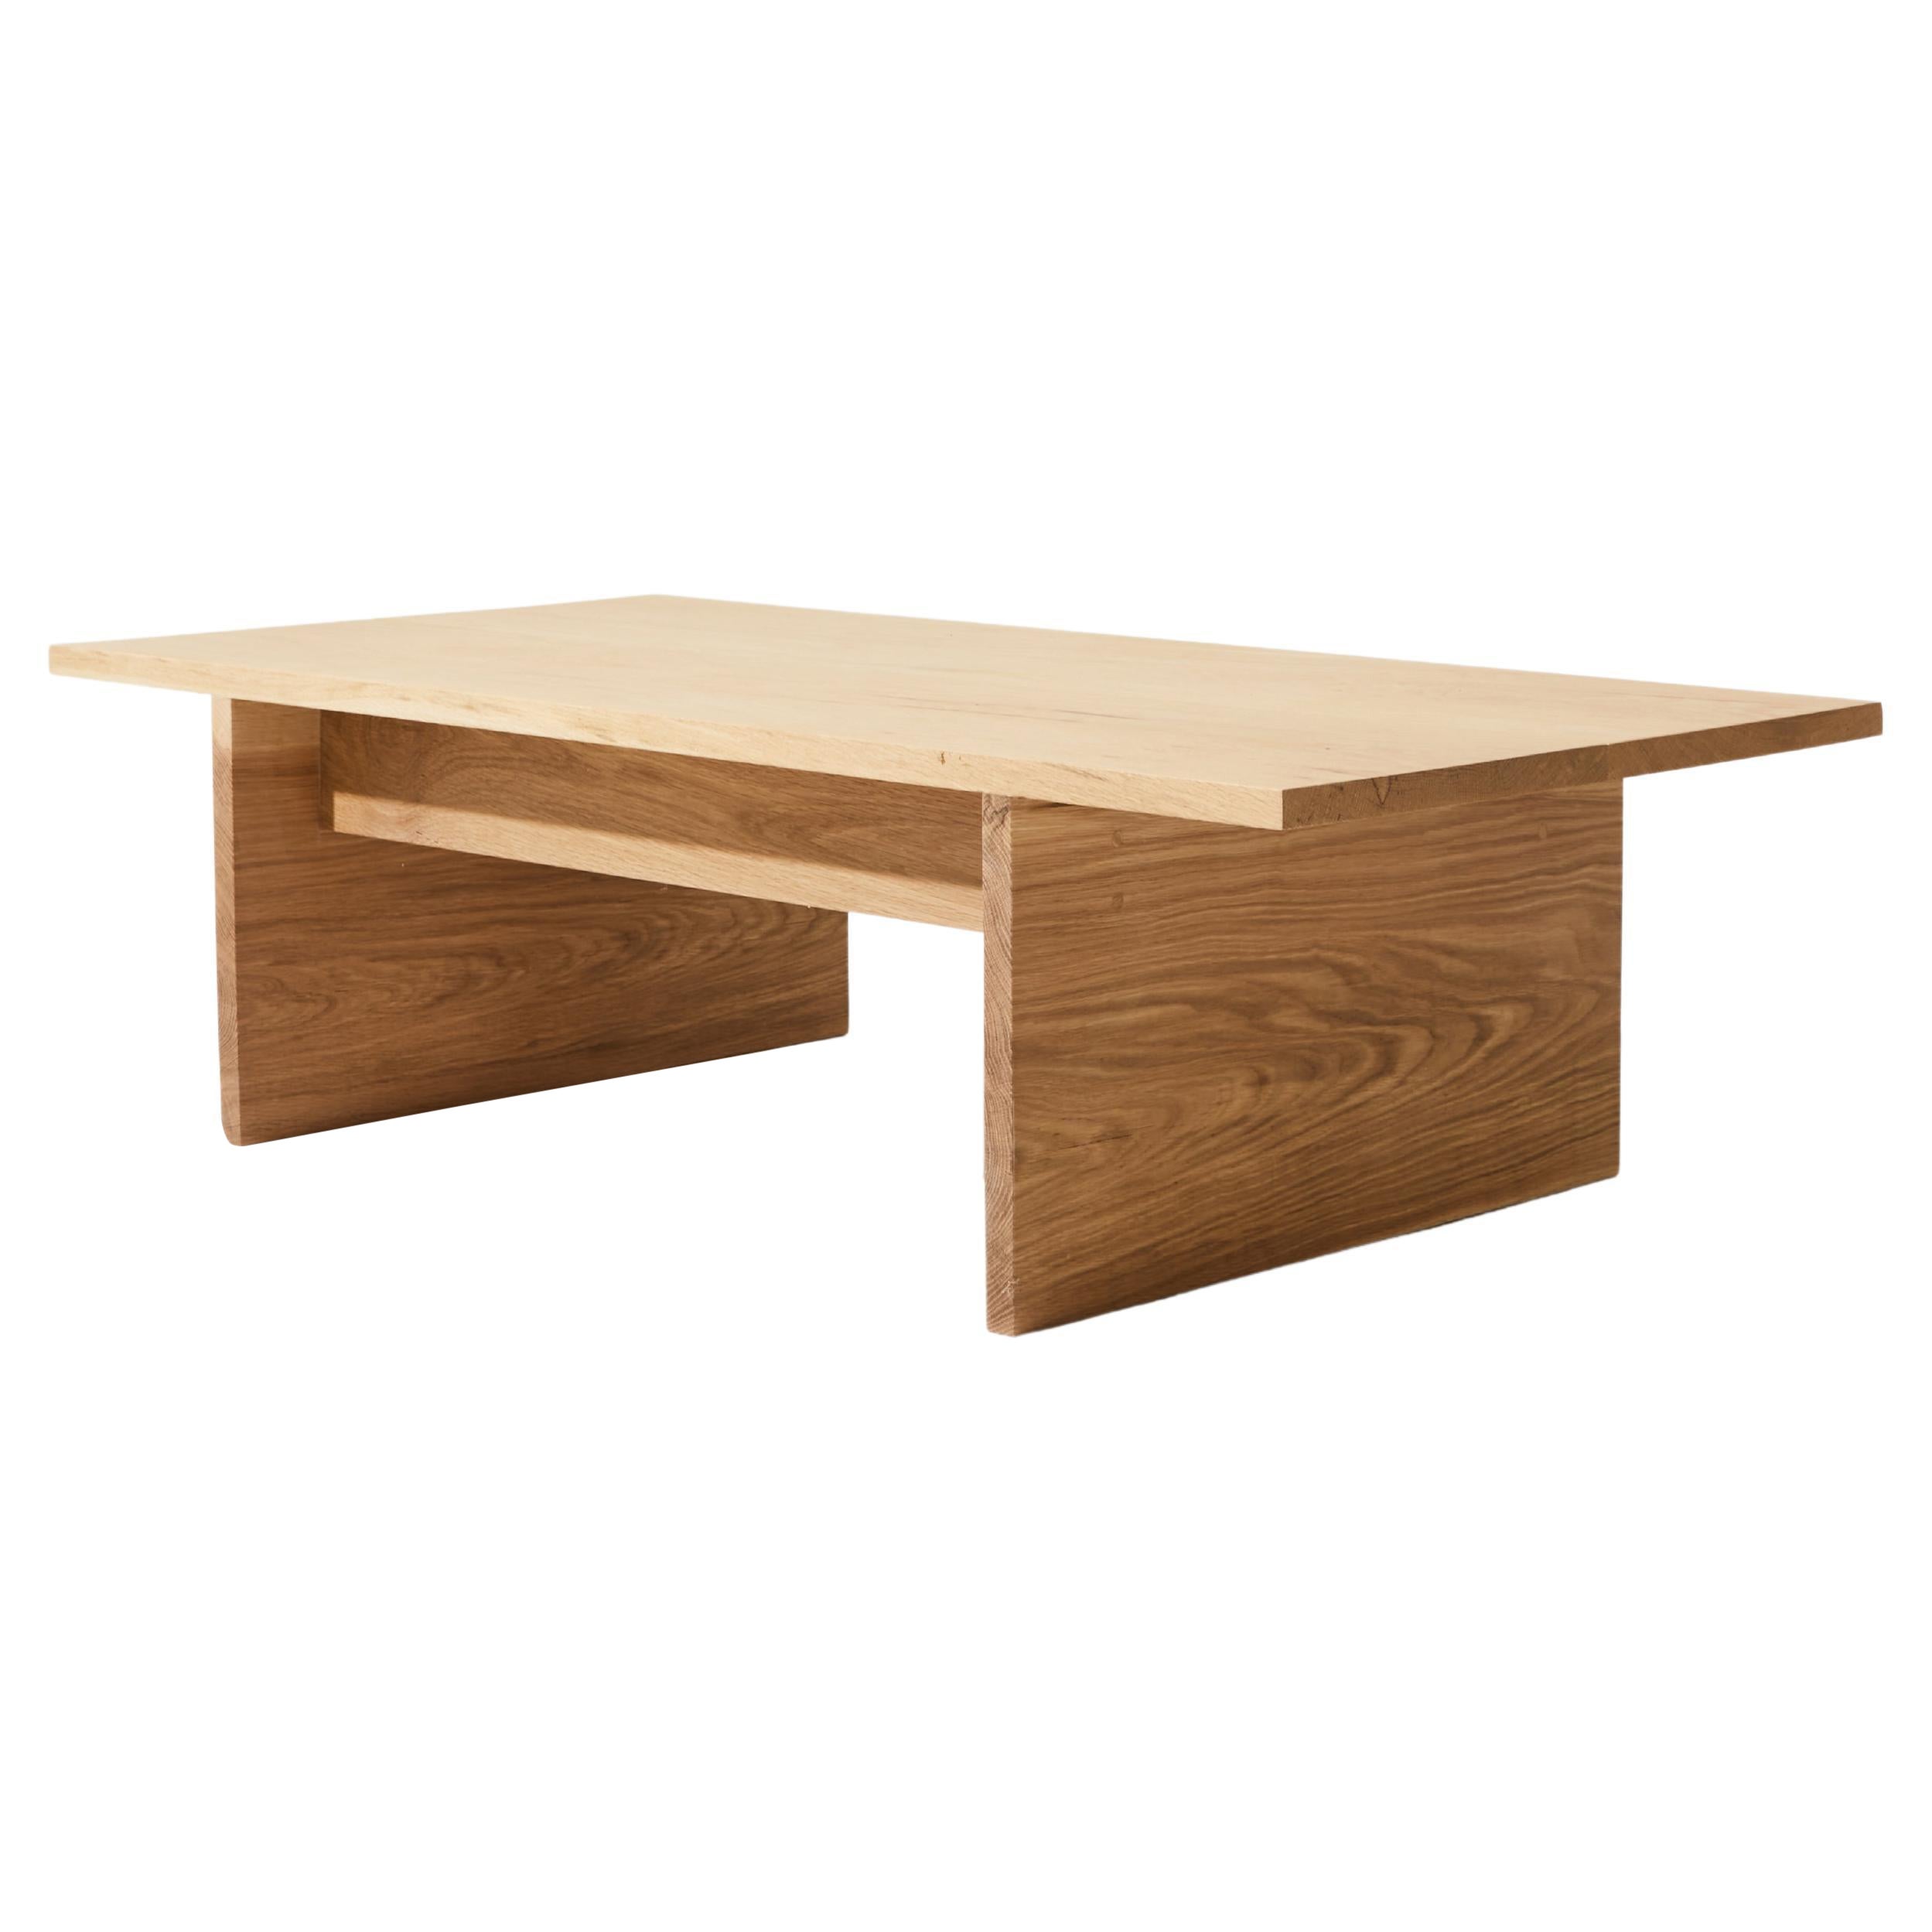 Danish Japanese Inspired Solid White Oak/ Walnut Coffee Table by Stille Home For Sale